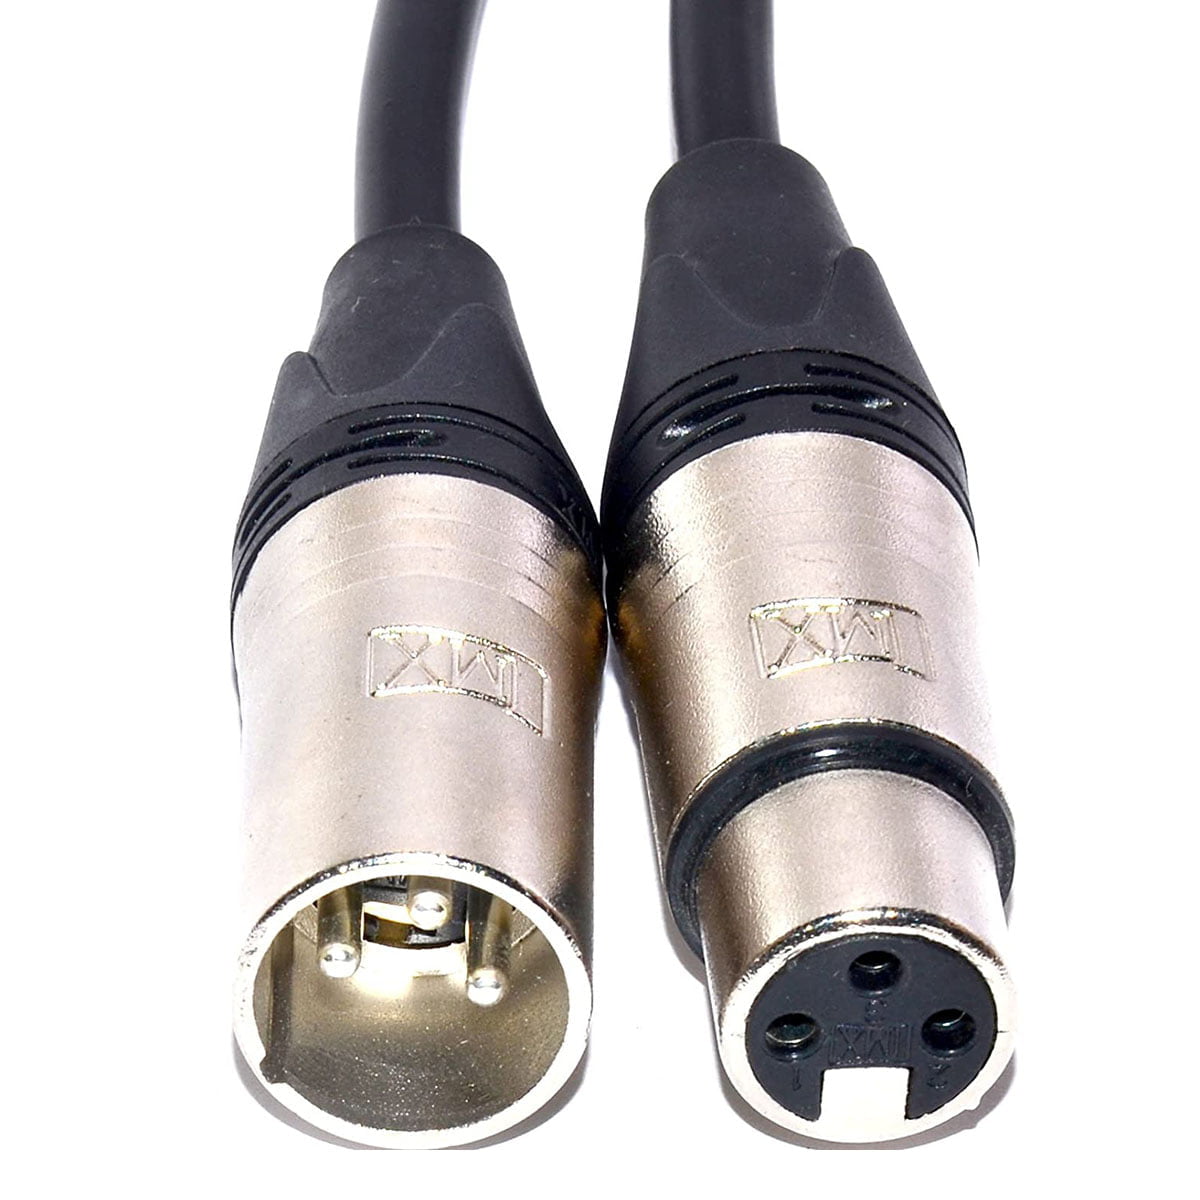 XLR-To-Xlr cable with MX